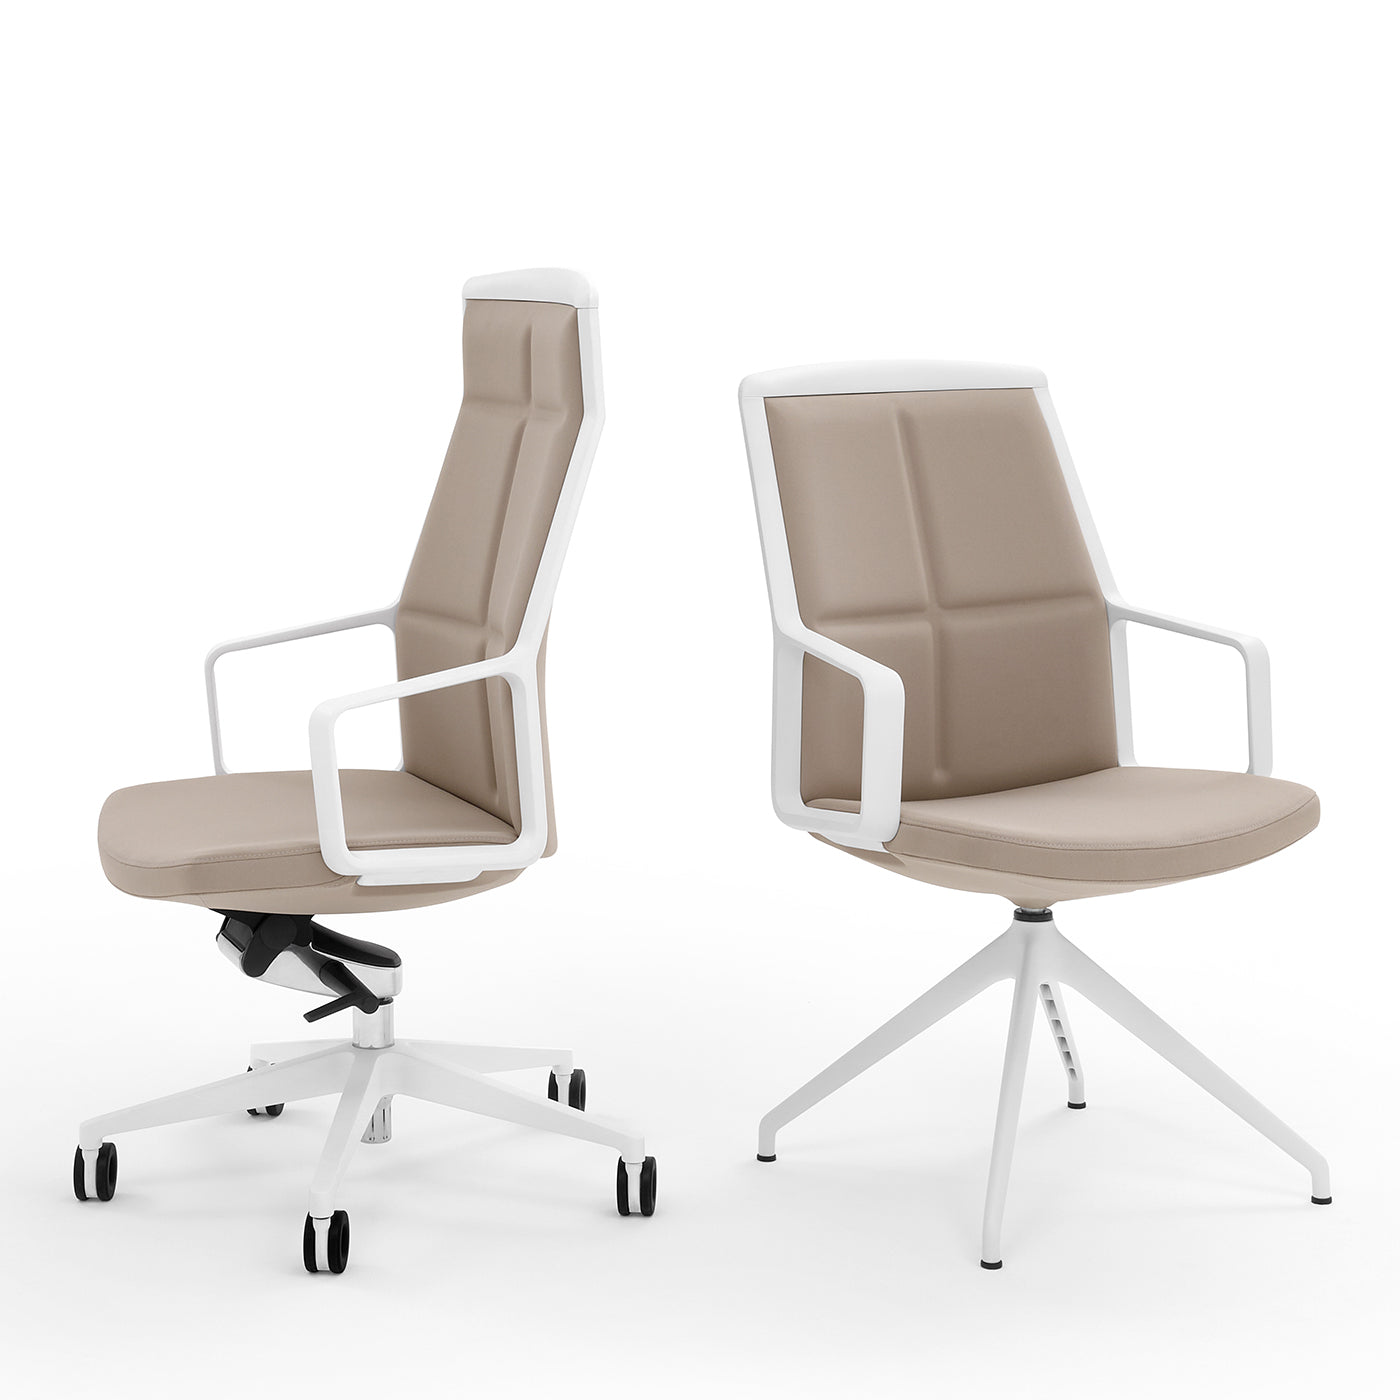 ADELE BEIGE EXECUTIVE CHAIR by ORLANDINIDESIGN - Alternative view 1